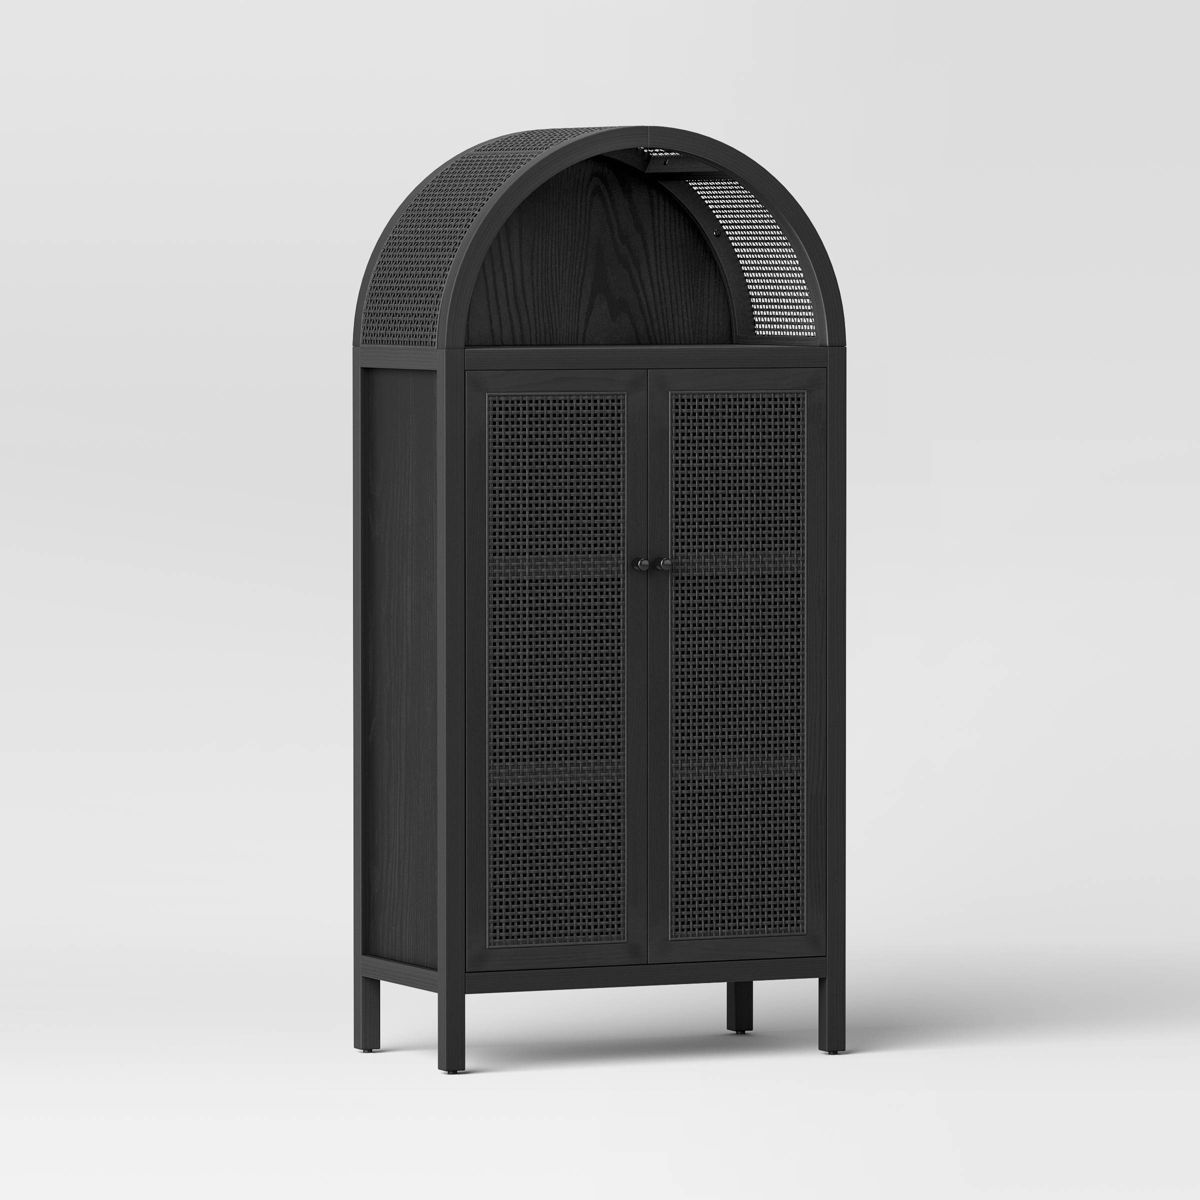 Woven Arched Wood Cabinet - Threshold™ | Target